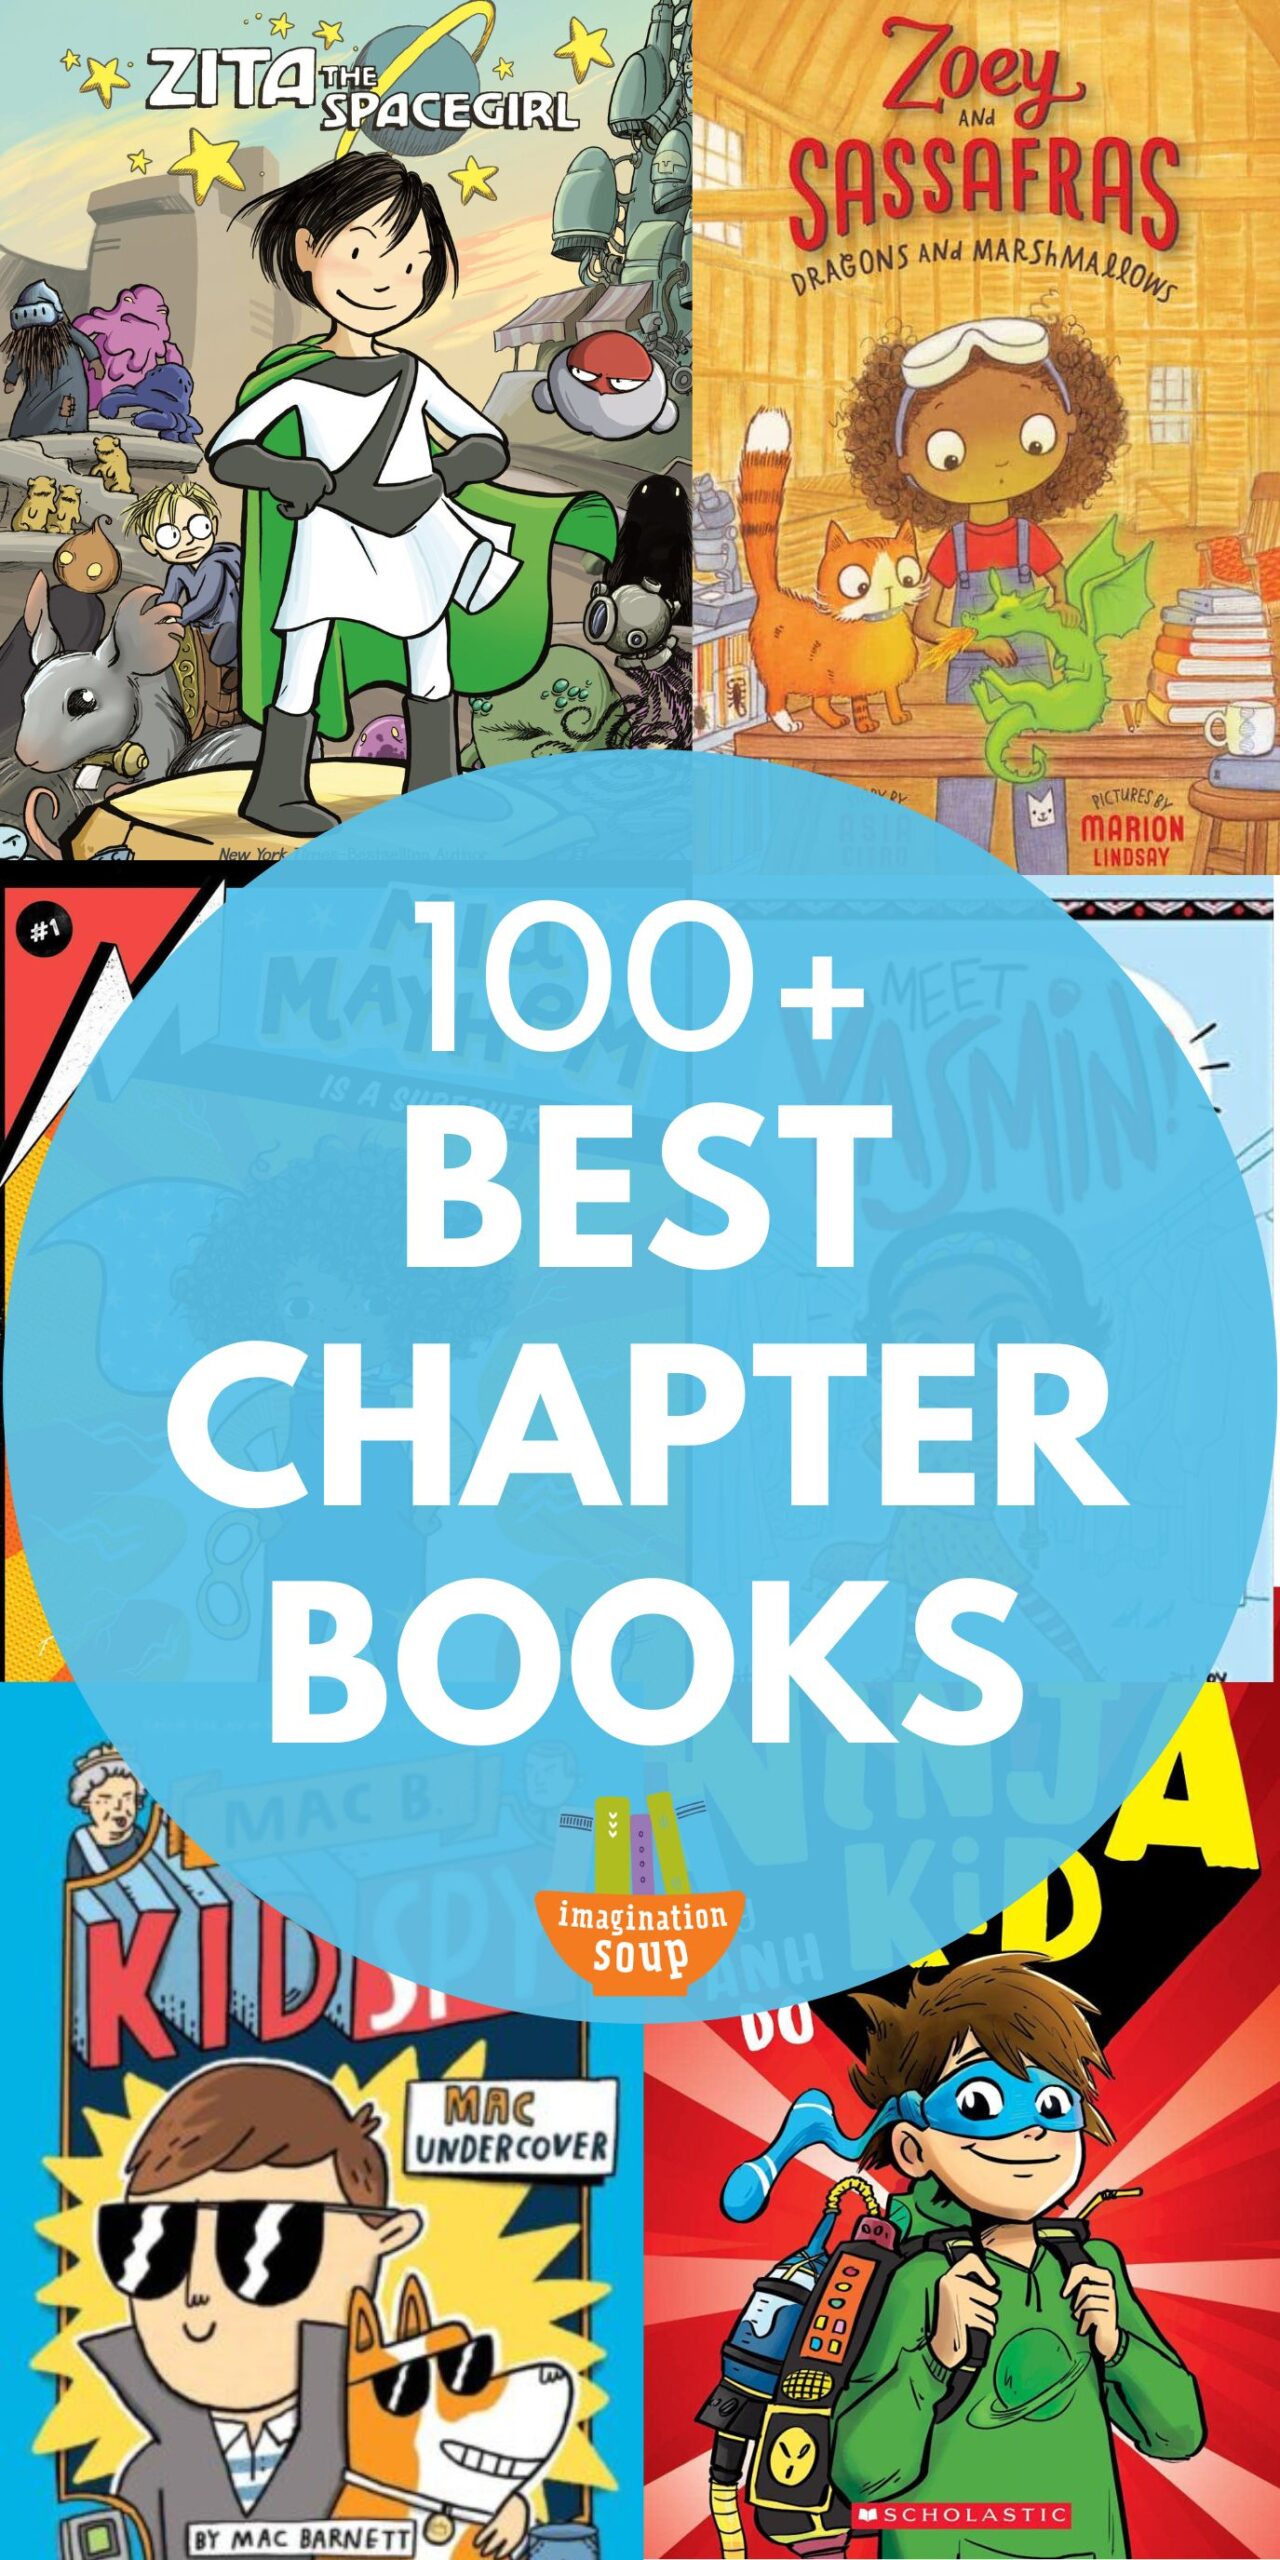 Whether you’re a parent, teacher, librarian, or grandparent, you want to find the best children’s chapter  books to share with the kids in your life--kids, grandkids, patrons, or students.